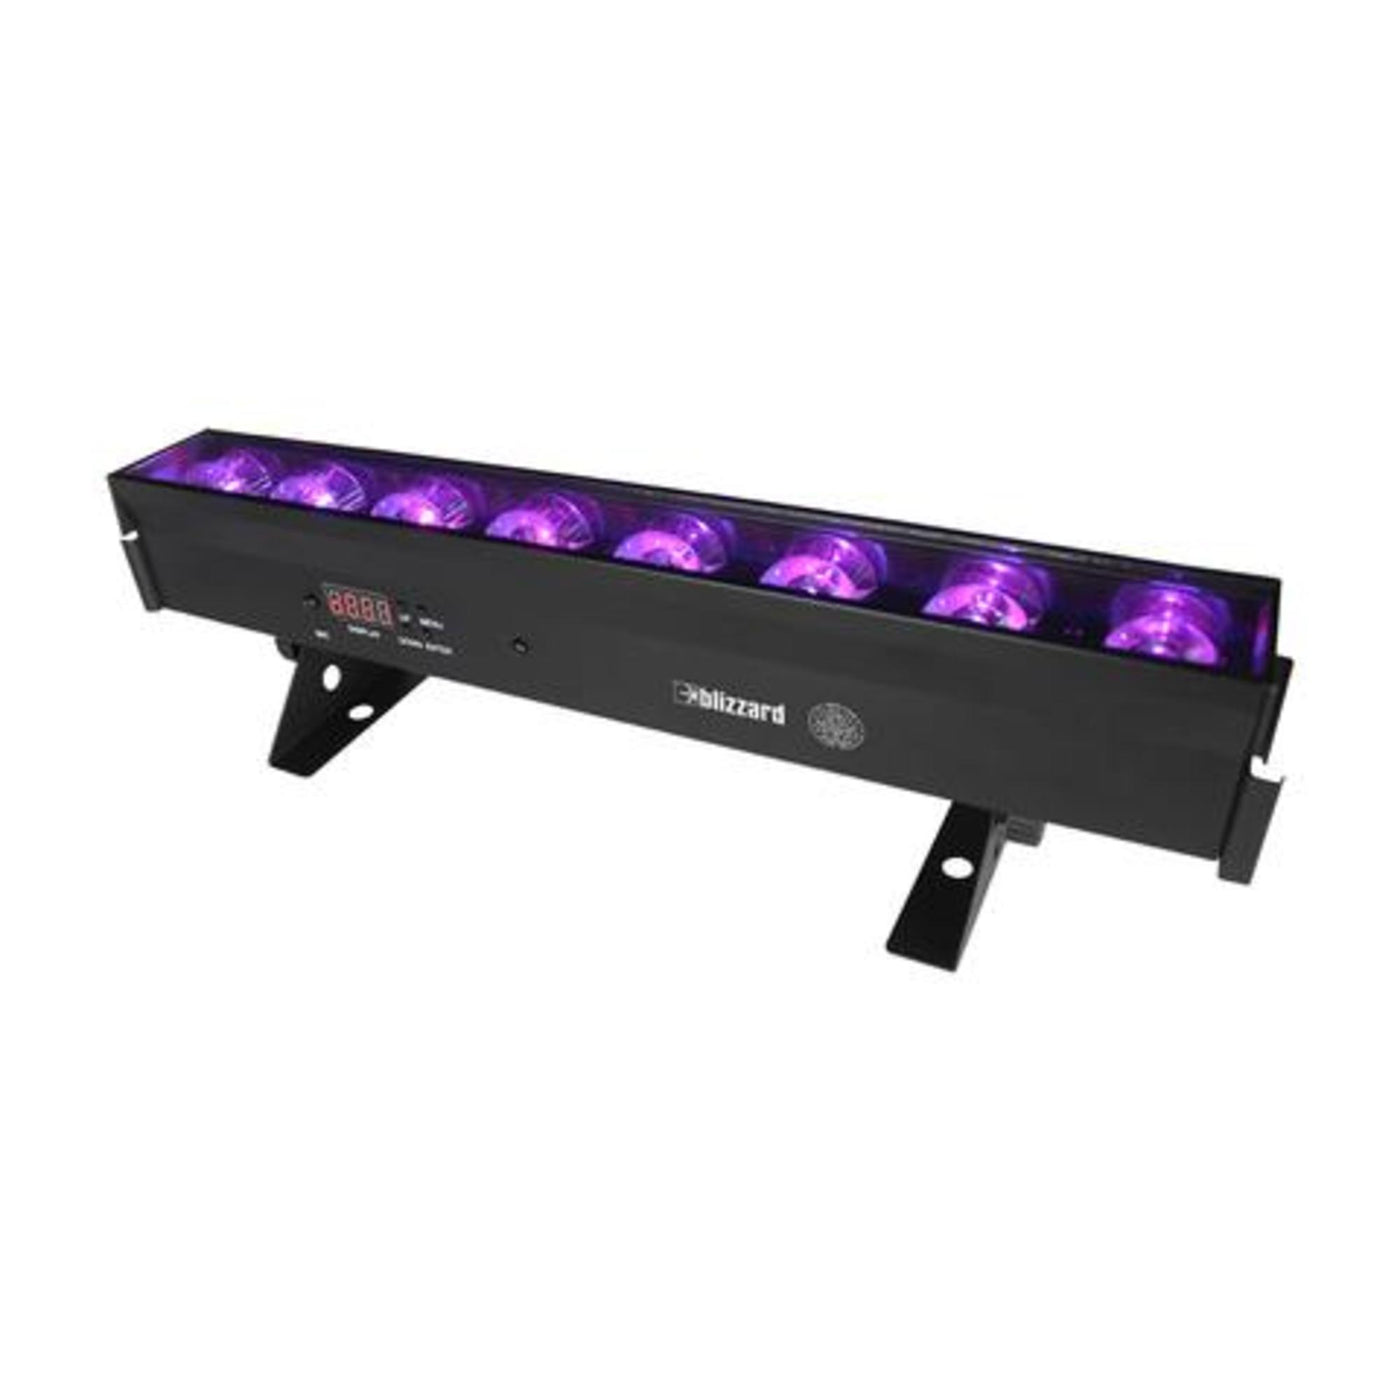 Blizzard 124240 LB Spektrum Compact Linear Wash Light with 160° of Brilliant Rainbow Colors